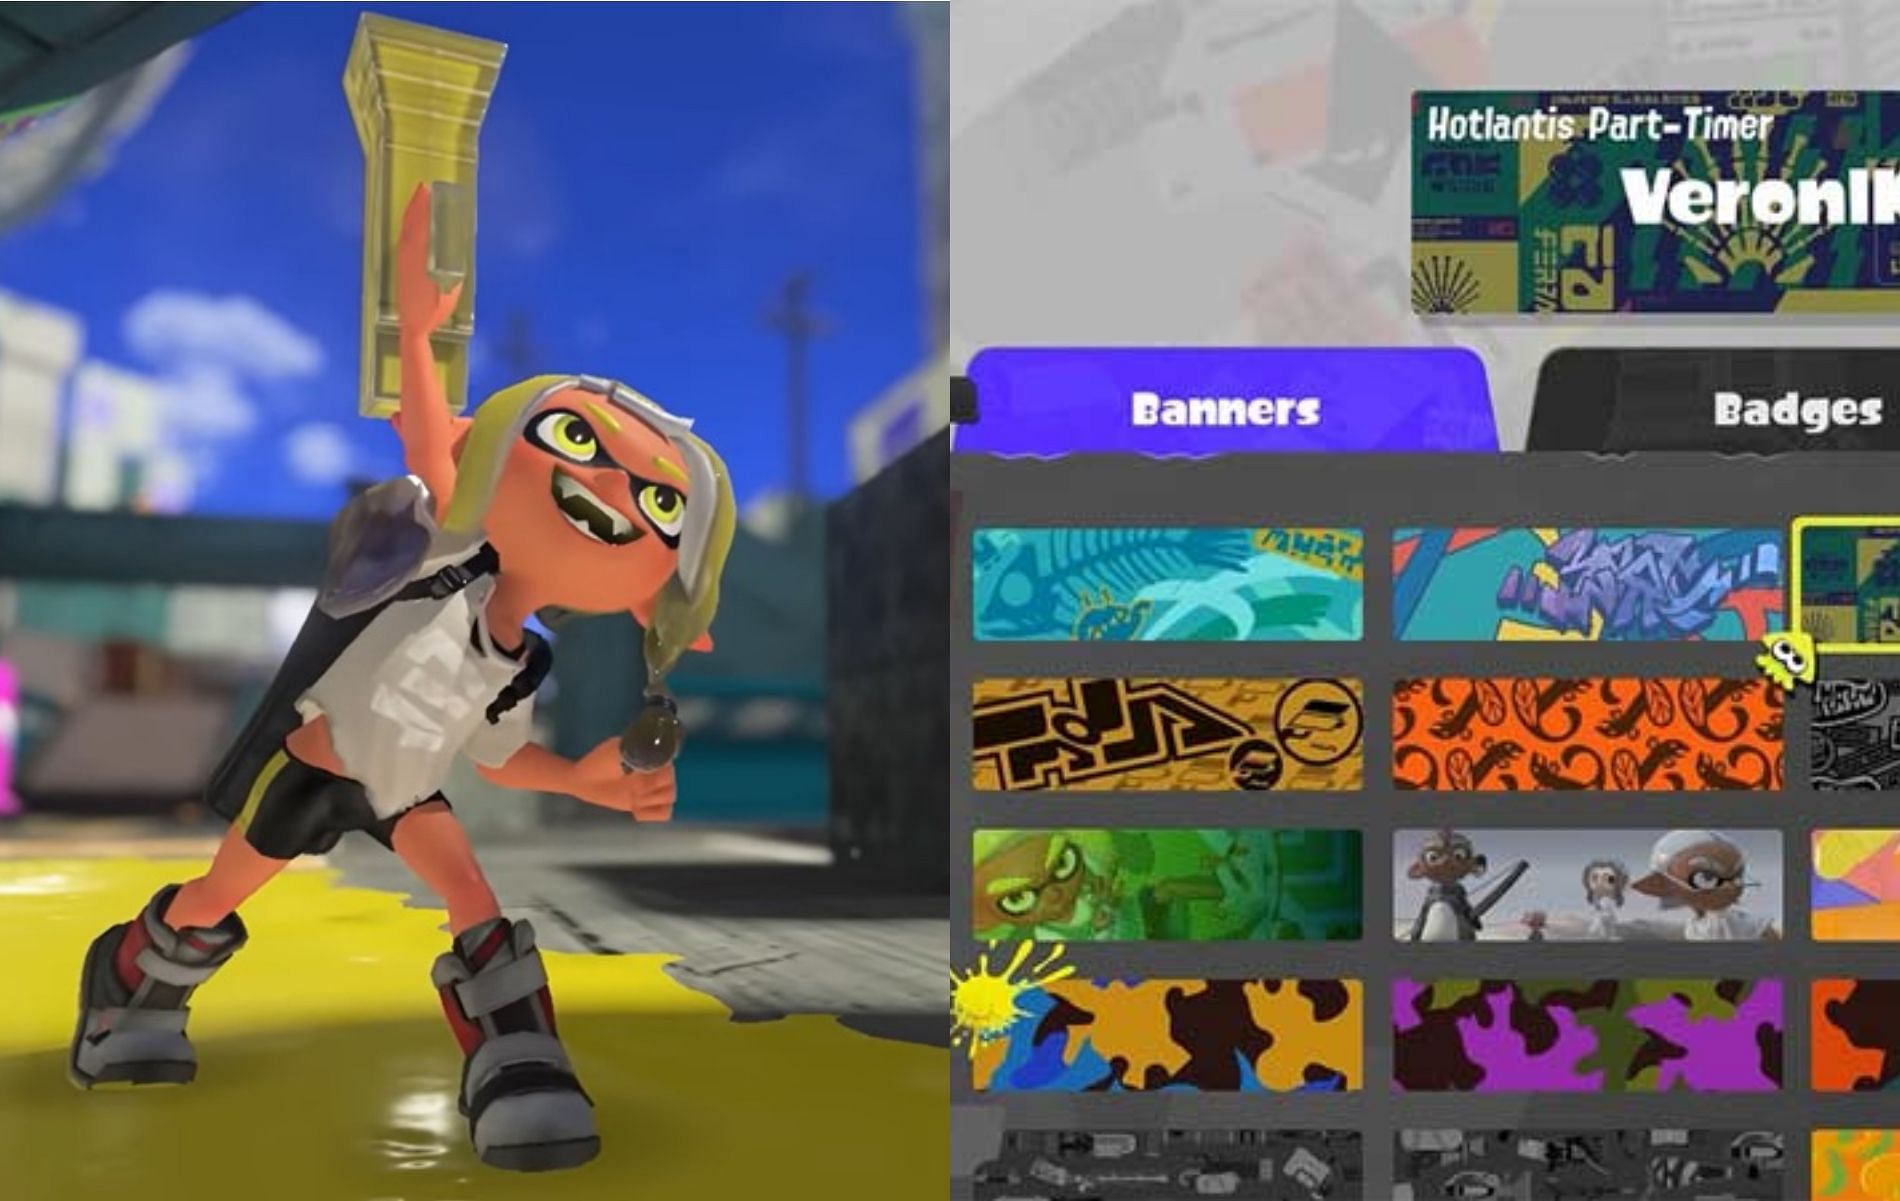 Spice up your profile with the banners in Splatoon 3 (Images via Nintendo)